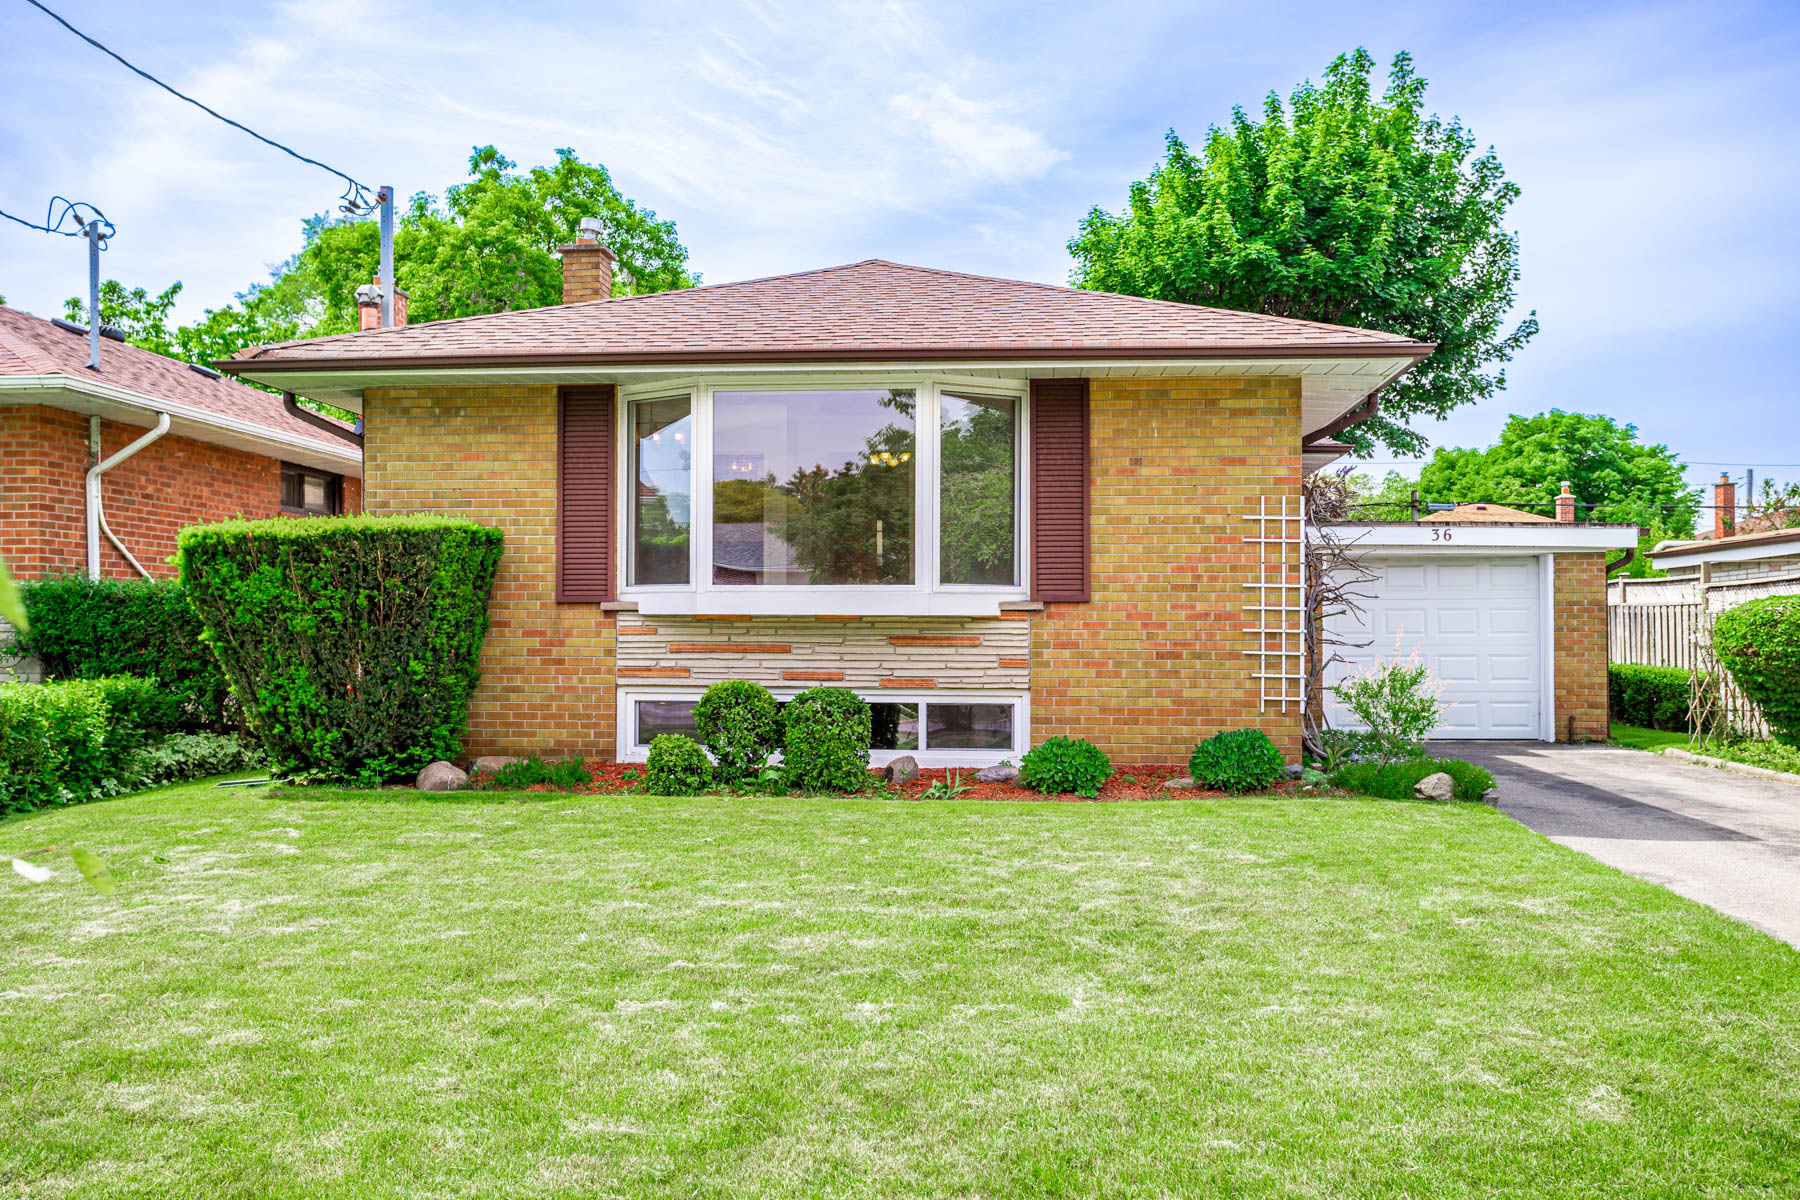 36 Earlton Rd, bungalow with red and brown bricks, large windows, and shingled roof.